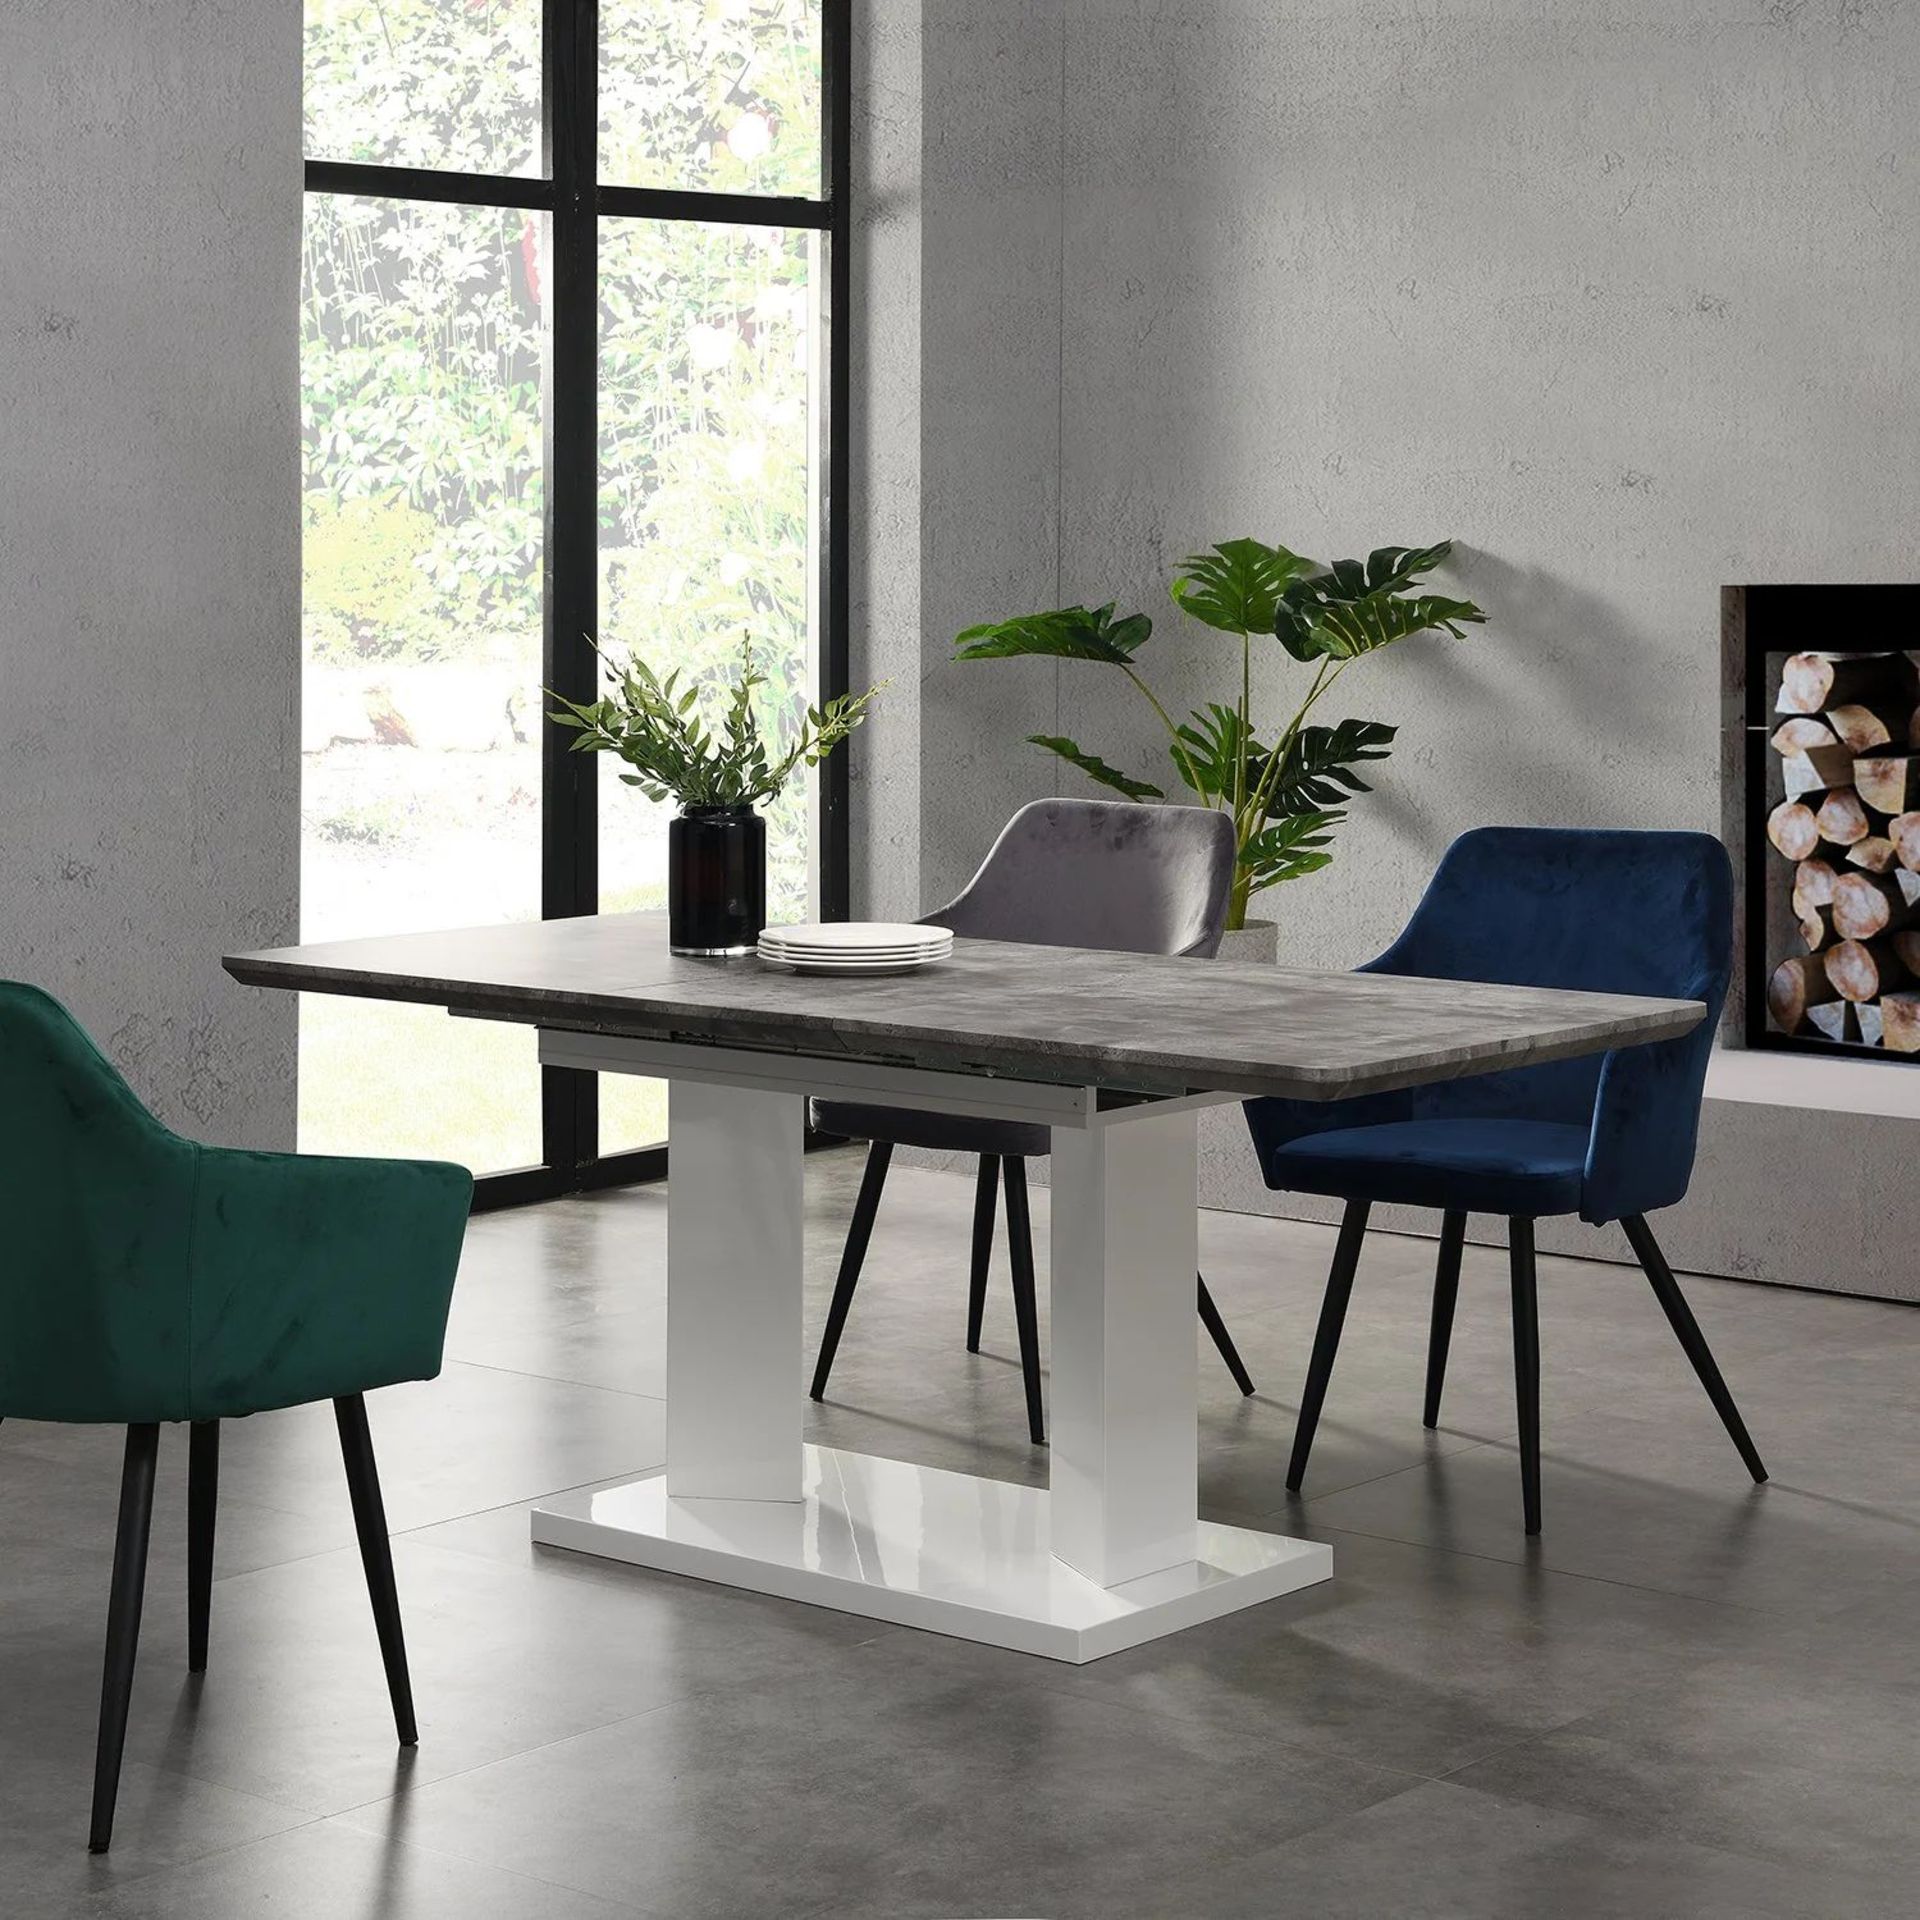 Goswell Concrete Effect Extending Dining Table 6 to 8 Seater. - SR3. RRP £429.99. Our stylish